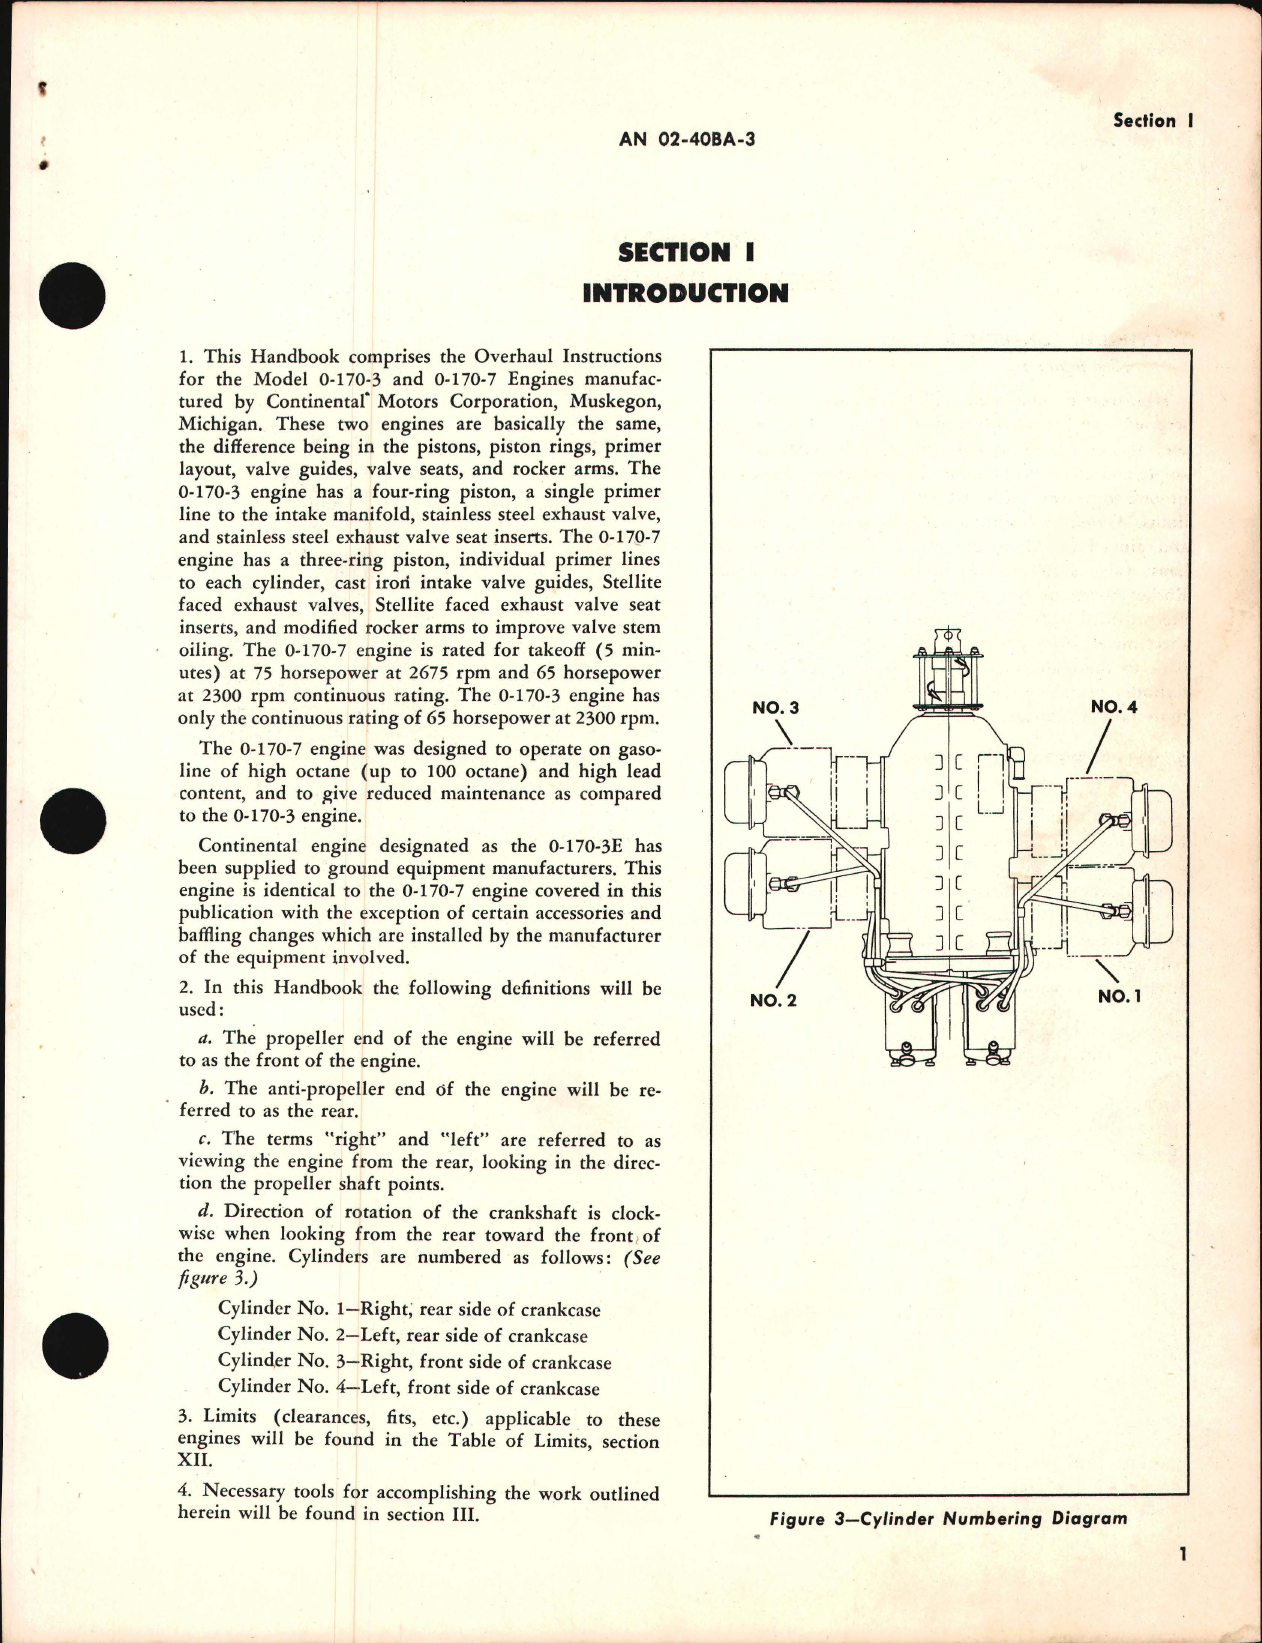 Sample page 5 from AirCorps Library document: Overhaul Instructions for O-170-3 and O-170-7 Engines